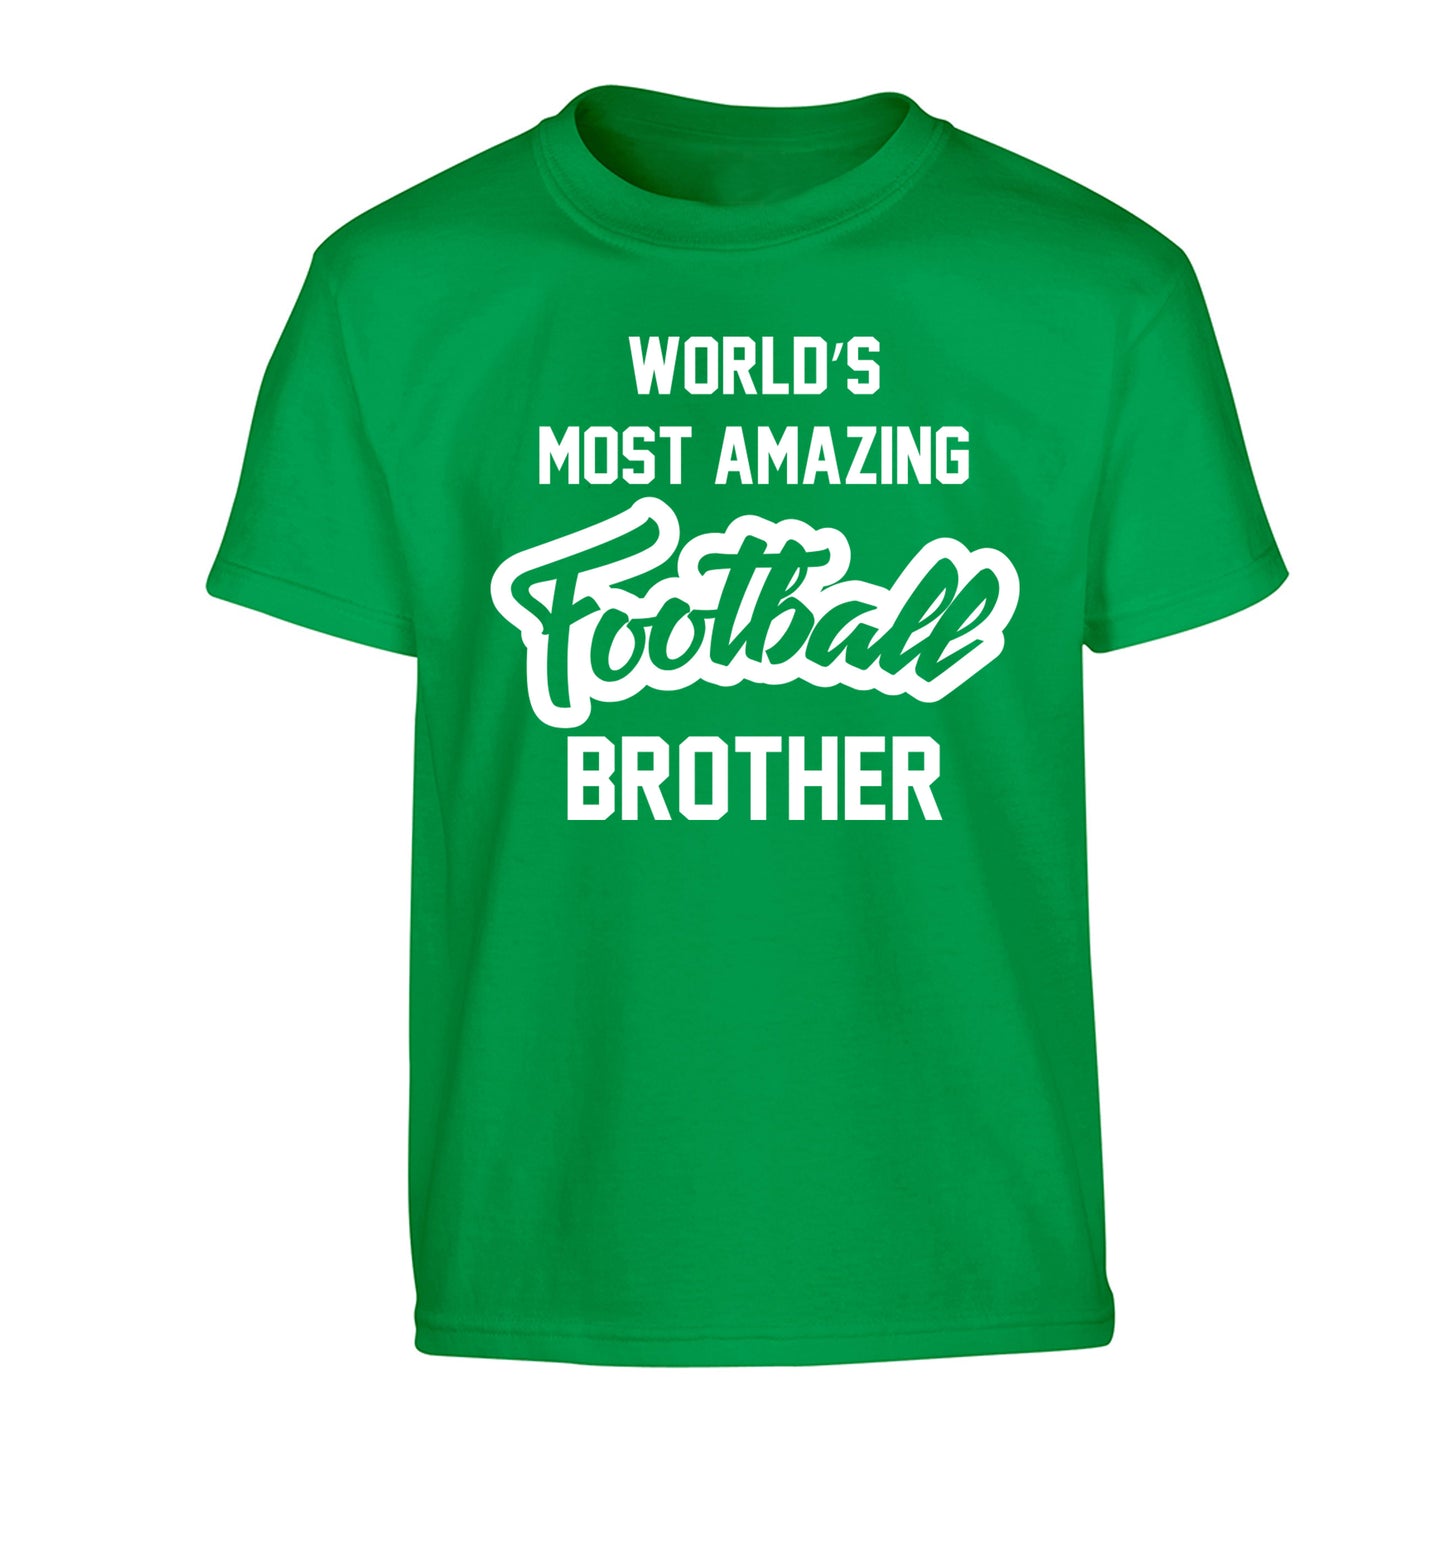 Worlds most amazing football brother Children's green Tshirt 12-14 Years